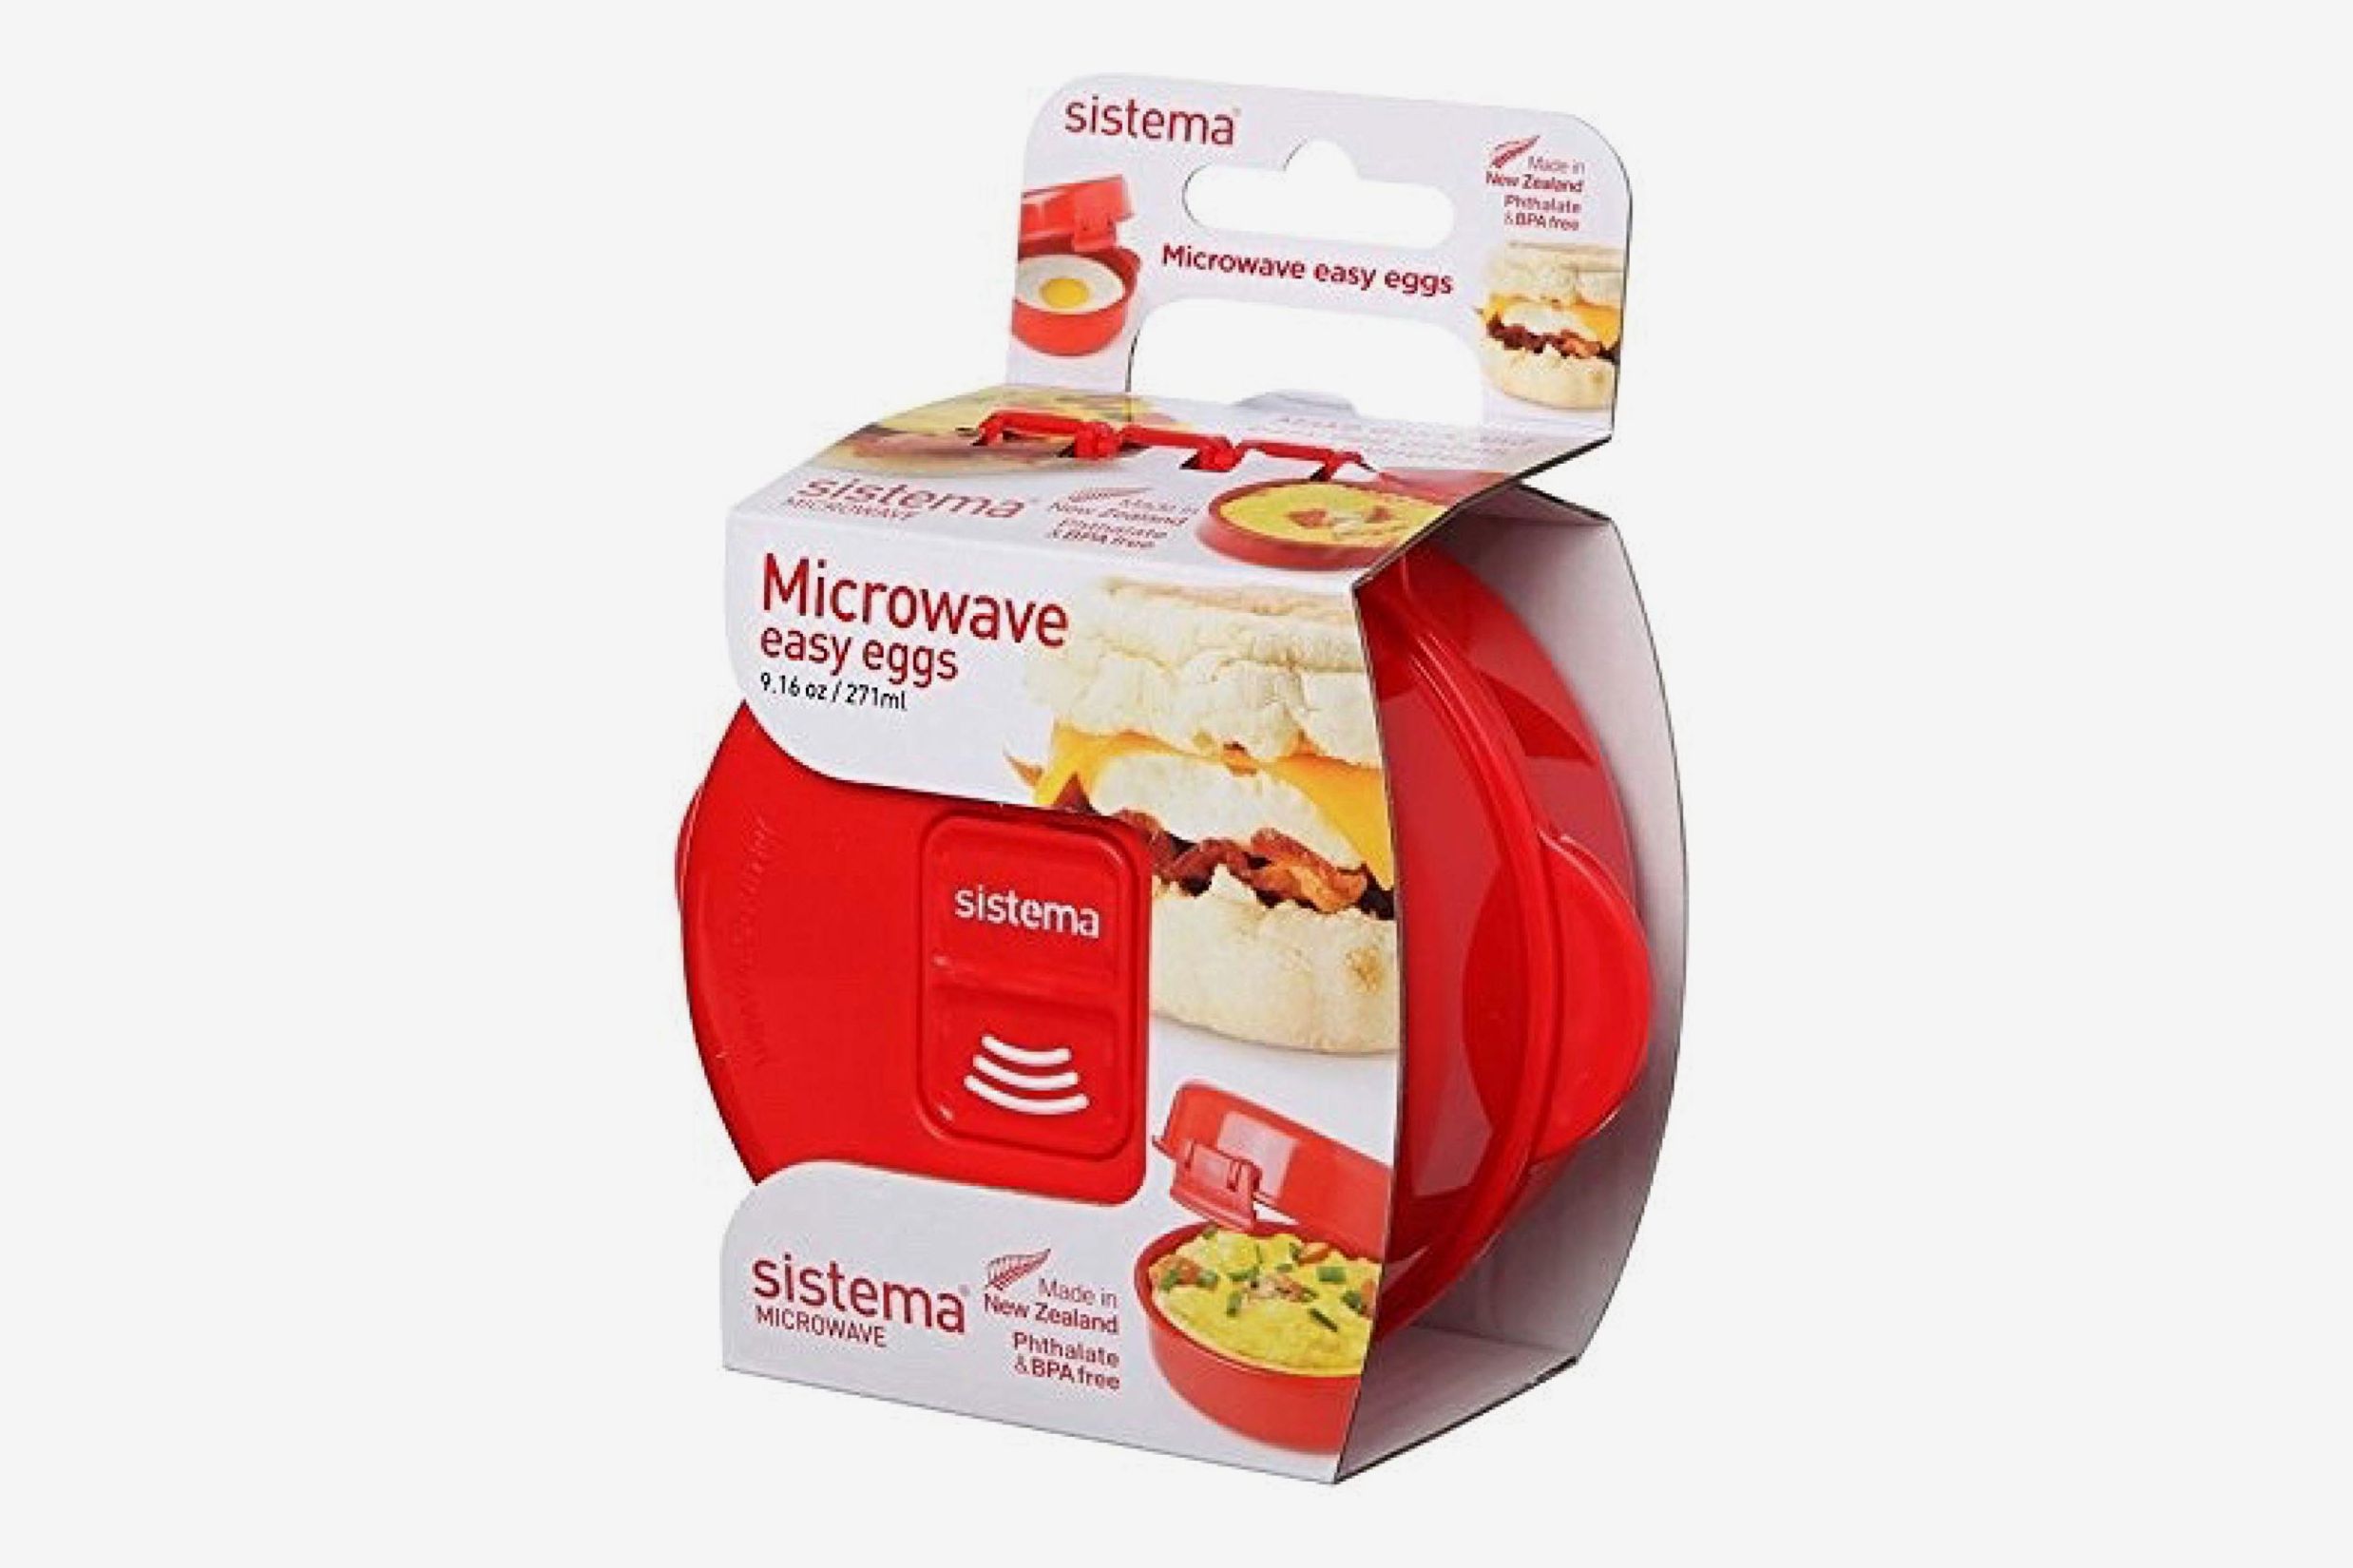 Breakfast Makers, Gourmia GEC175 Electric Egg Cooker - Soft, Medium or Hard  Boil - Poacher and Steamer Trays - 6 Egg Capacity - Steaming Shelf for  Bread and Vegetables - Create Unique Recipes